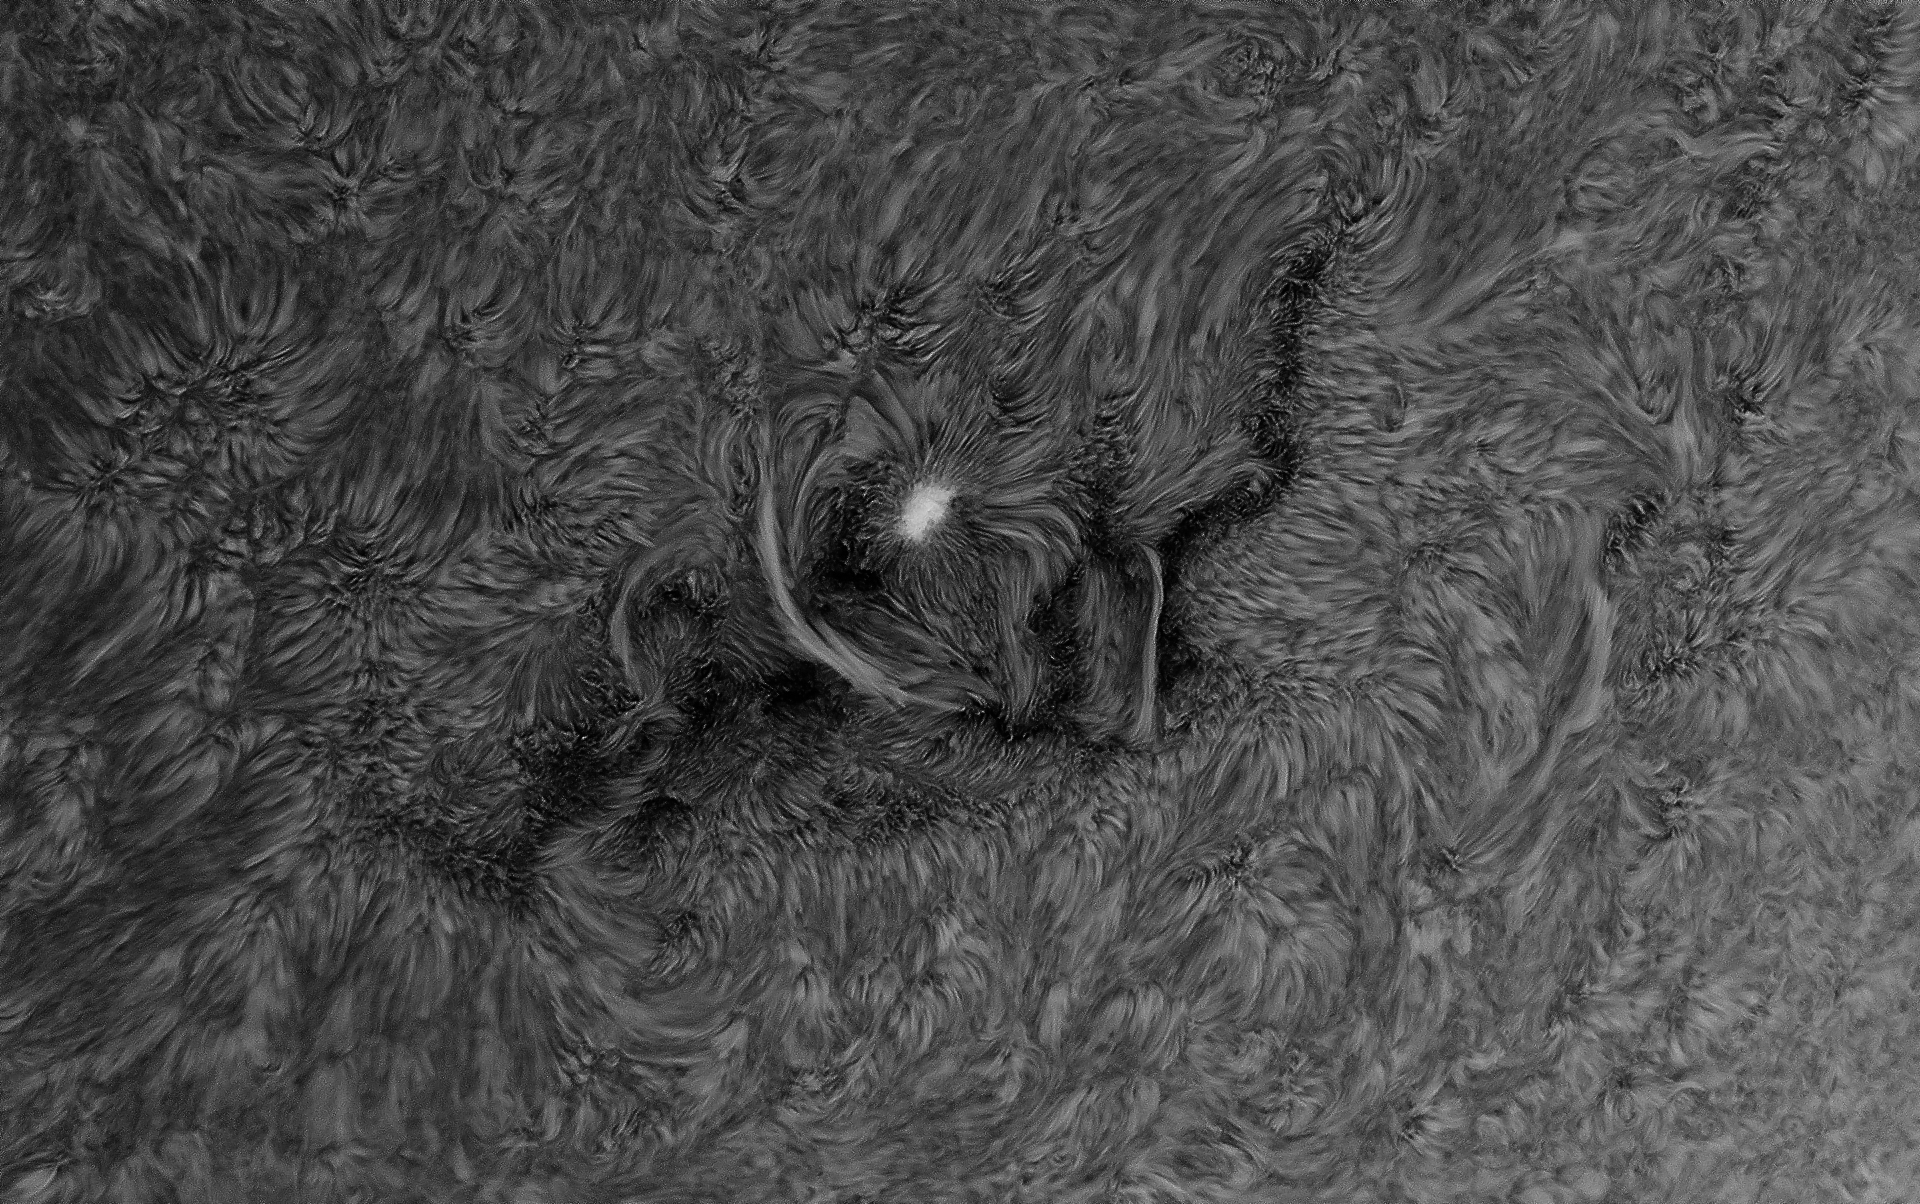 Sun in Ha Band with HaT telescope